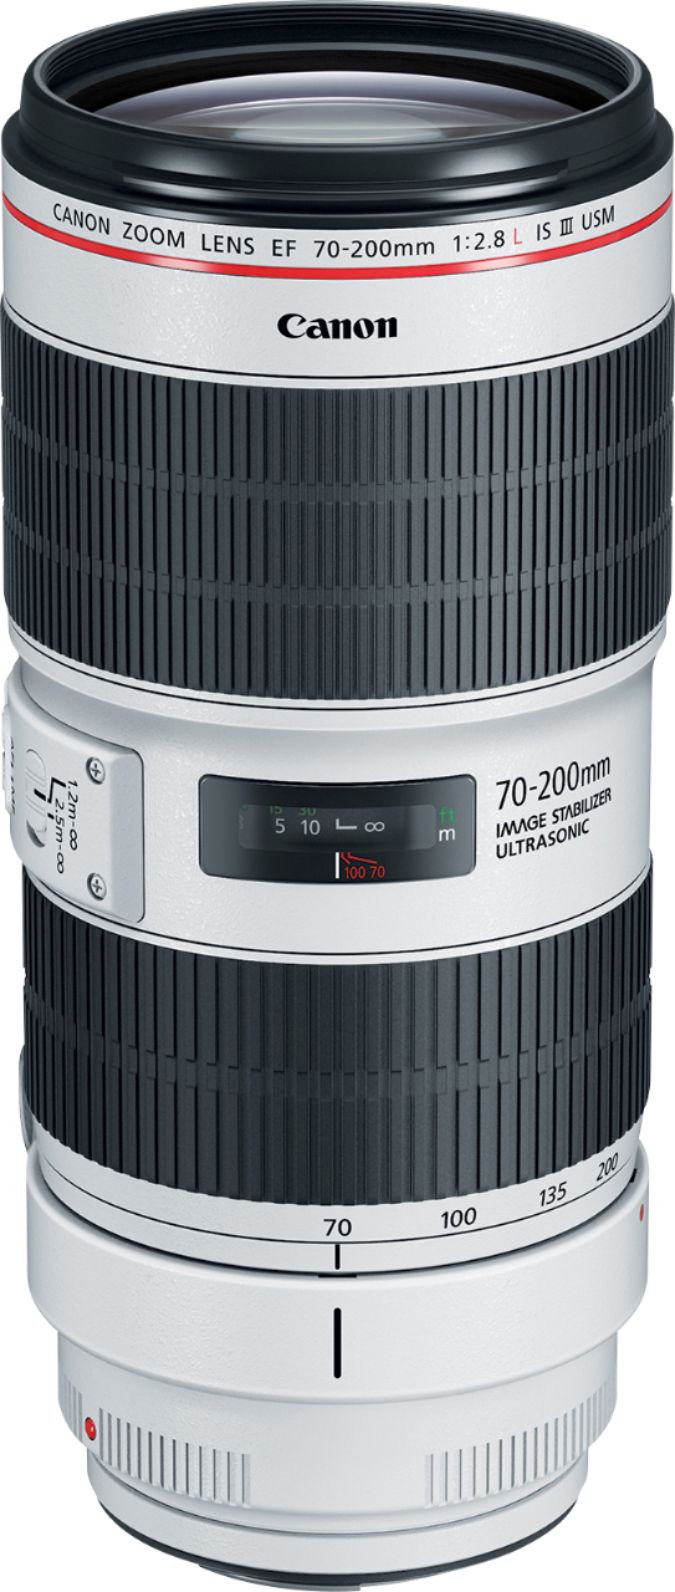 EF70-200mm F2.8L IS III USM Optical Telephoto Zoom Lens for Canon EOS DSLR  Cameras White 3044C002 - Best Buy